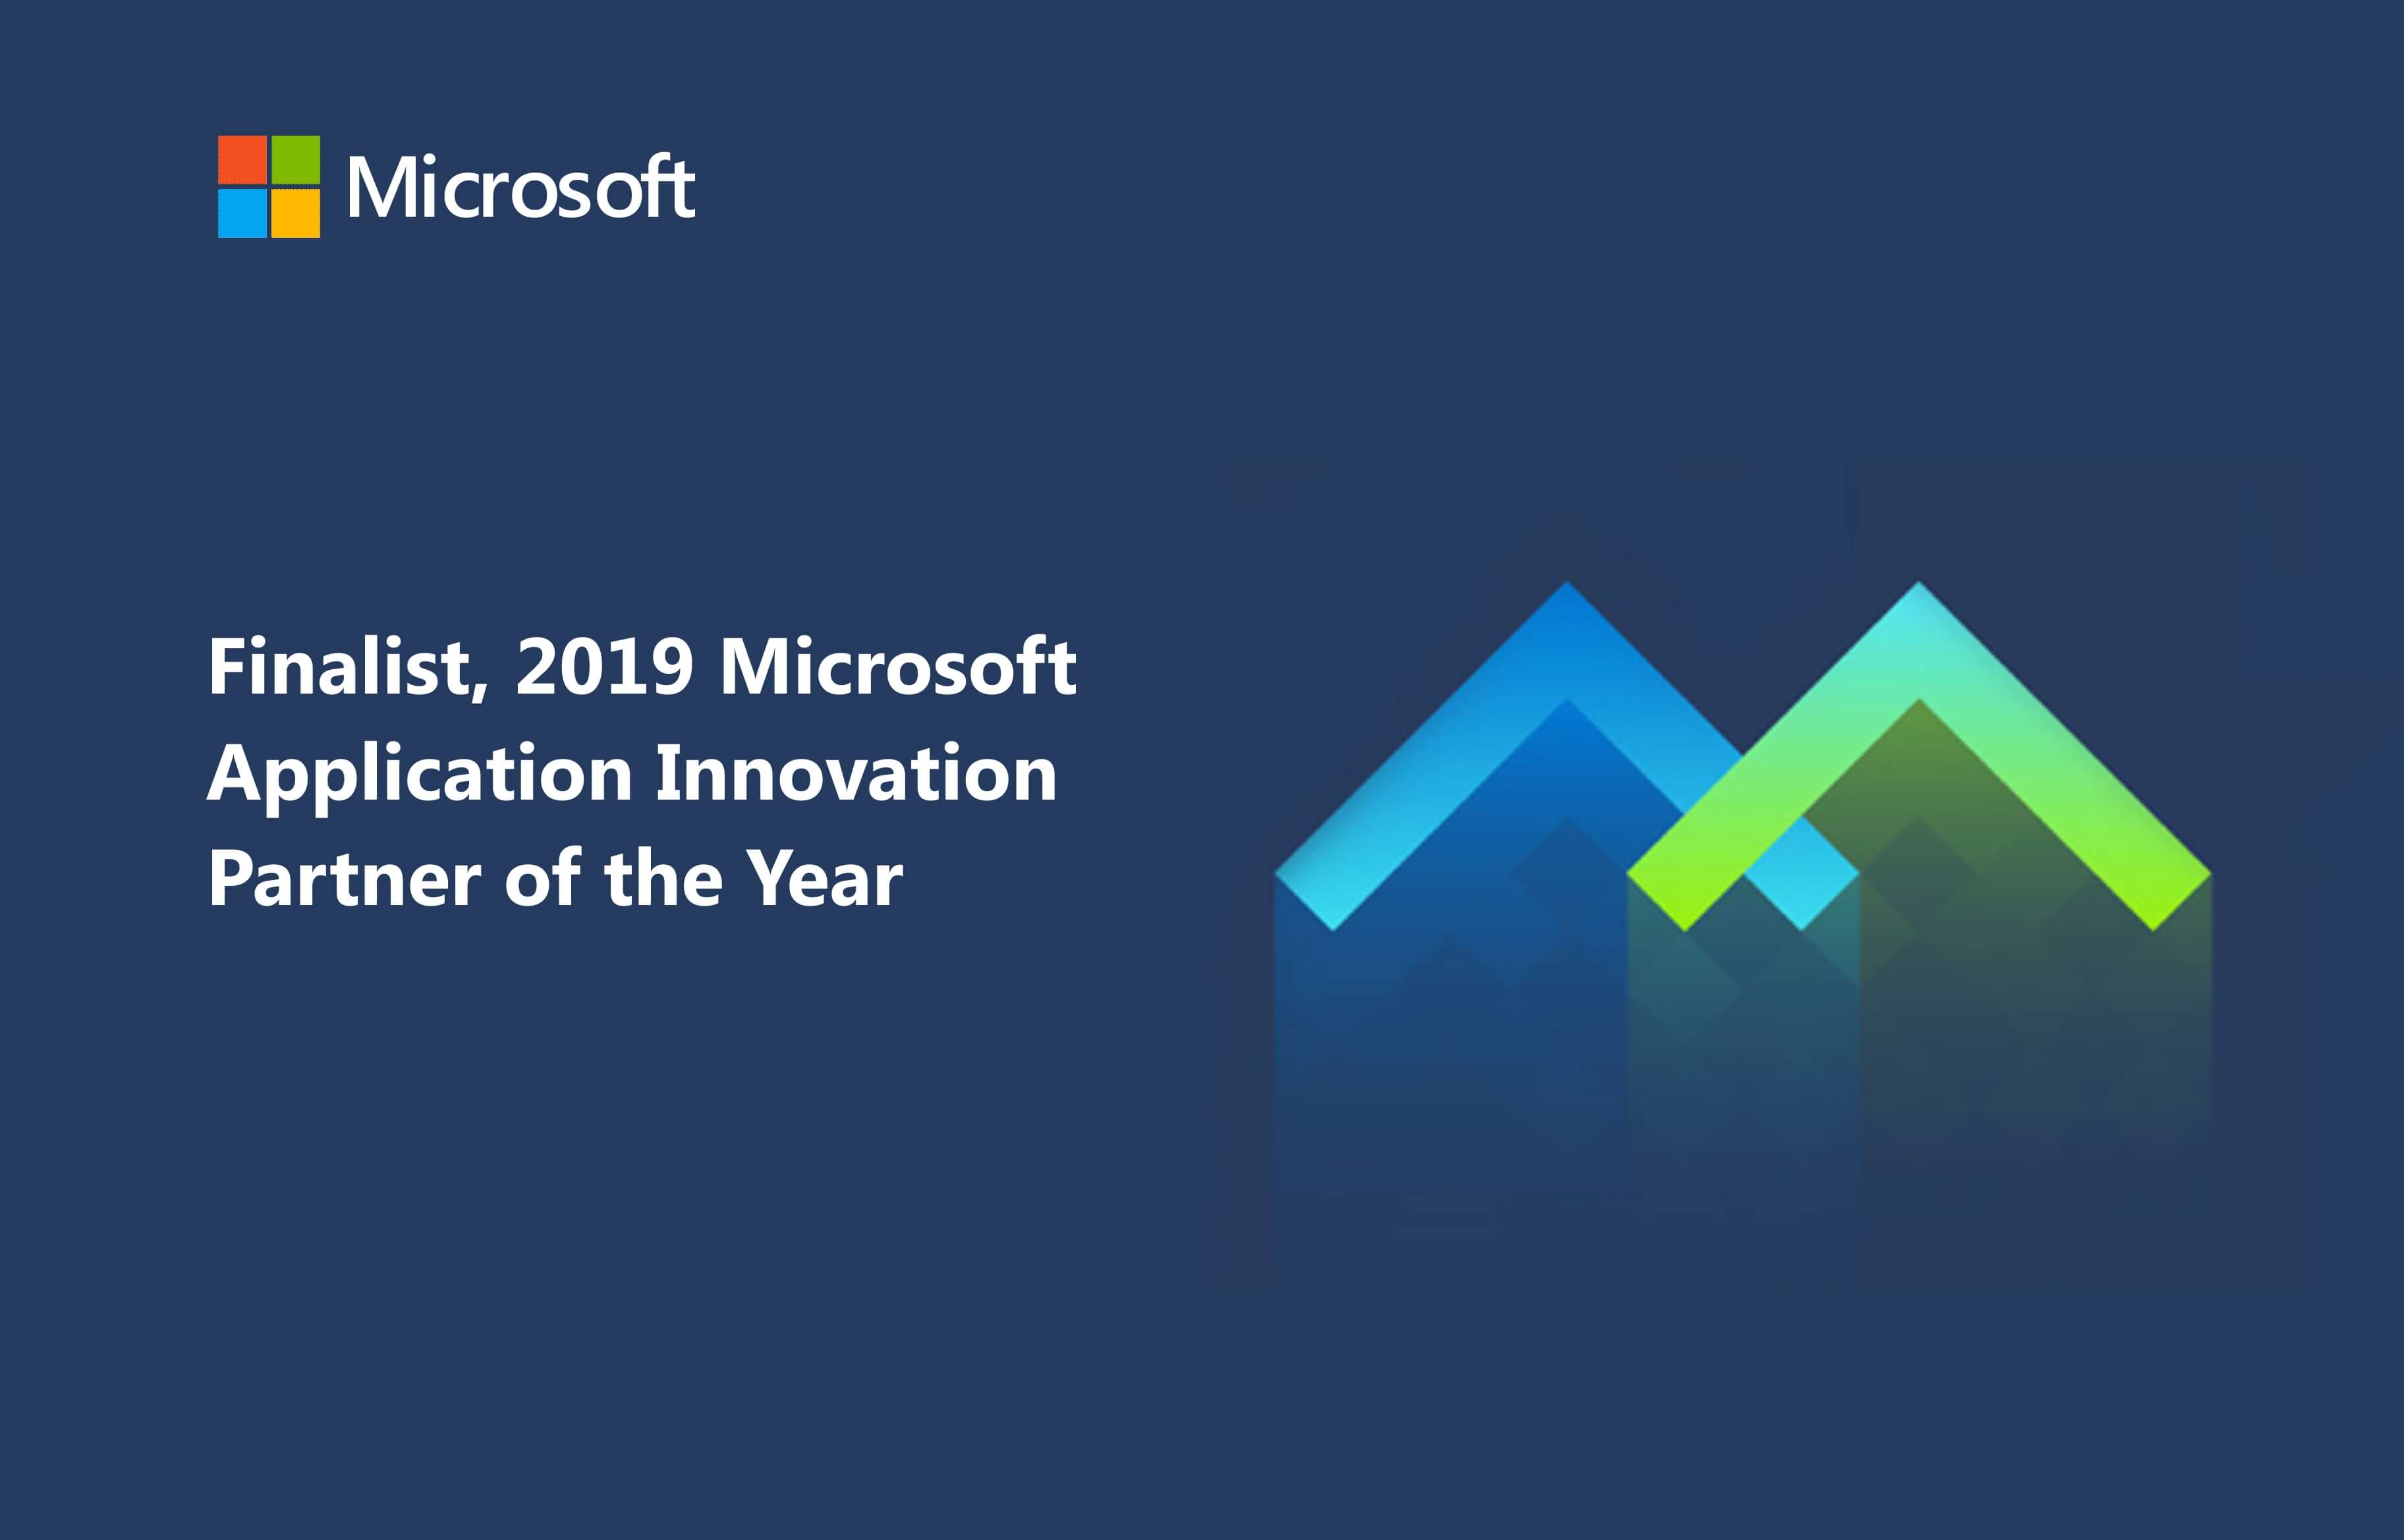 Wragby is recognized as a finalist in the 2019 Microsoft Application Innovation Partner of the Year Award